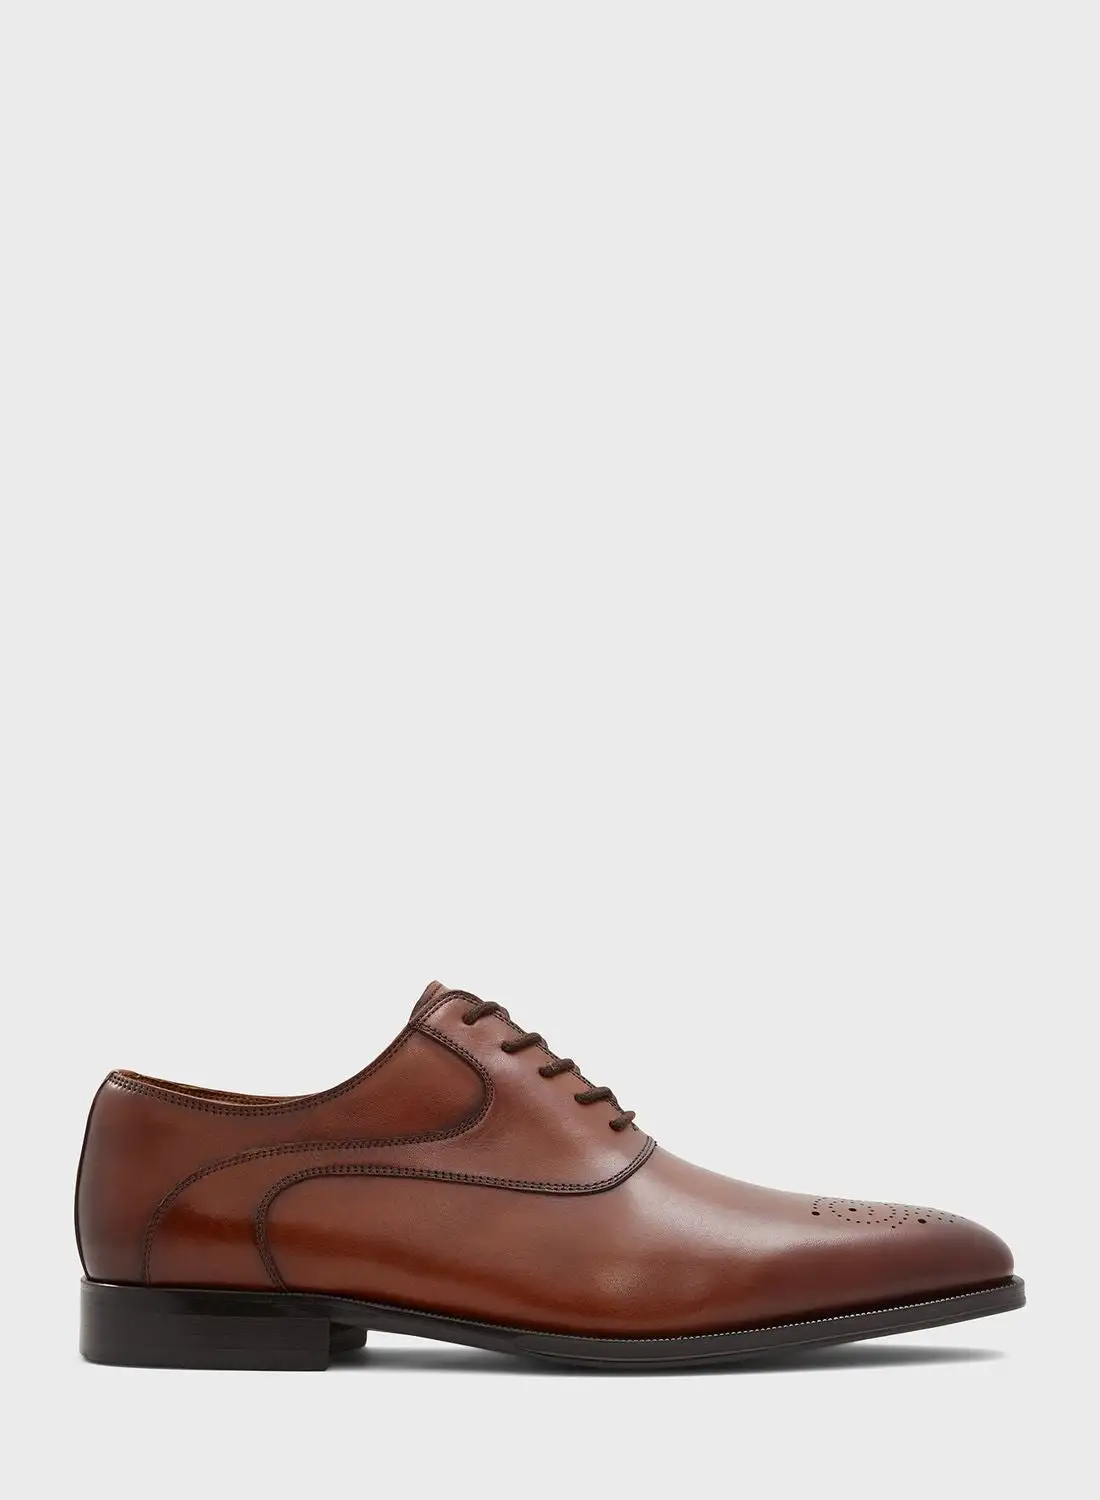 ALDO Simmons Formal Lace Up Shoes